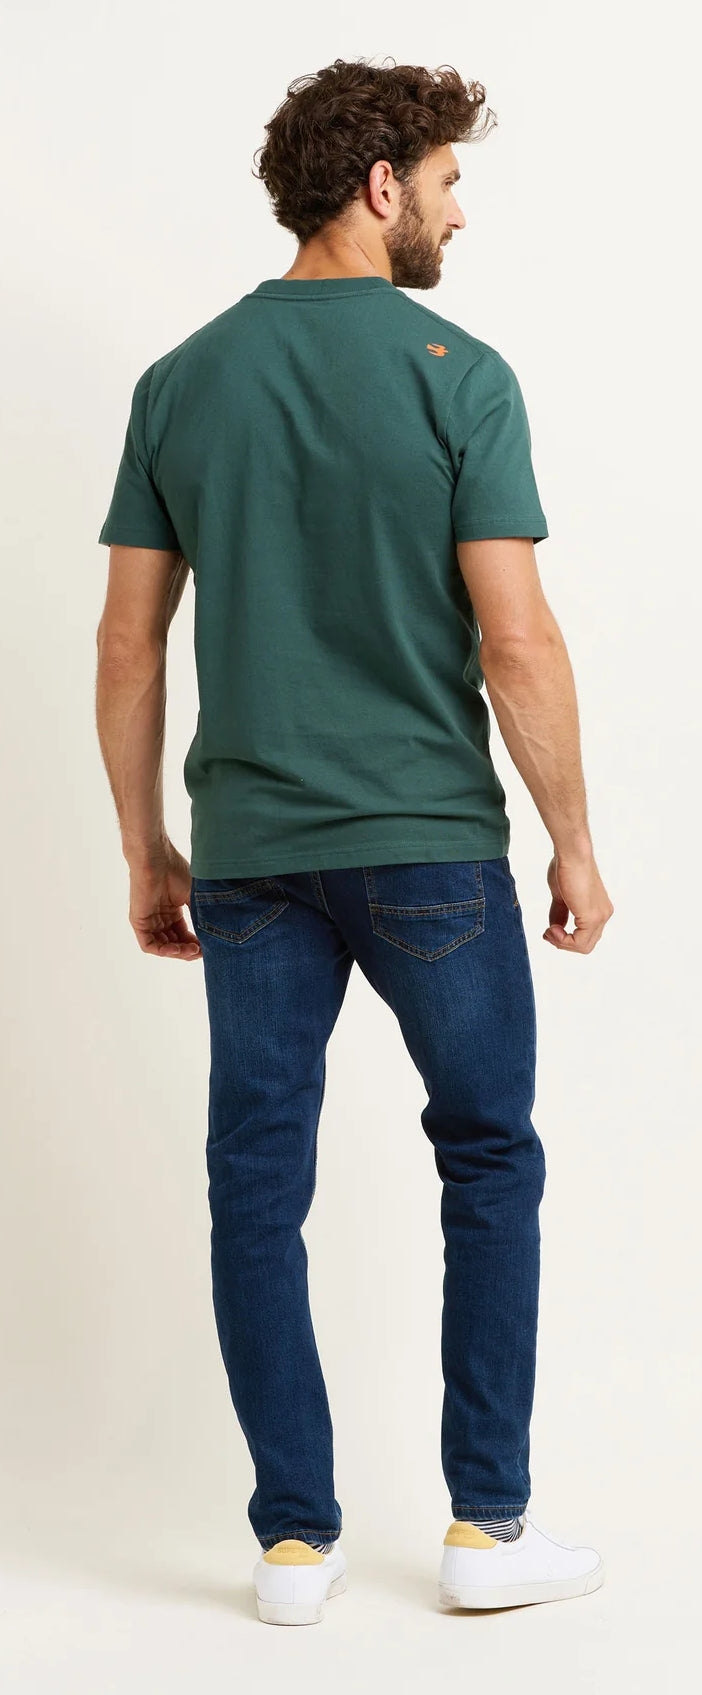 Men's Brakeburn Blood, Sweat and Gears printed tee in khaki green with a small bird logo on the back of one shoulder. 